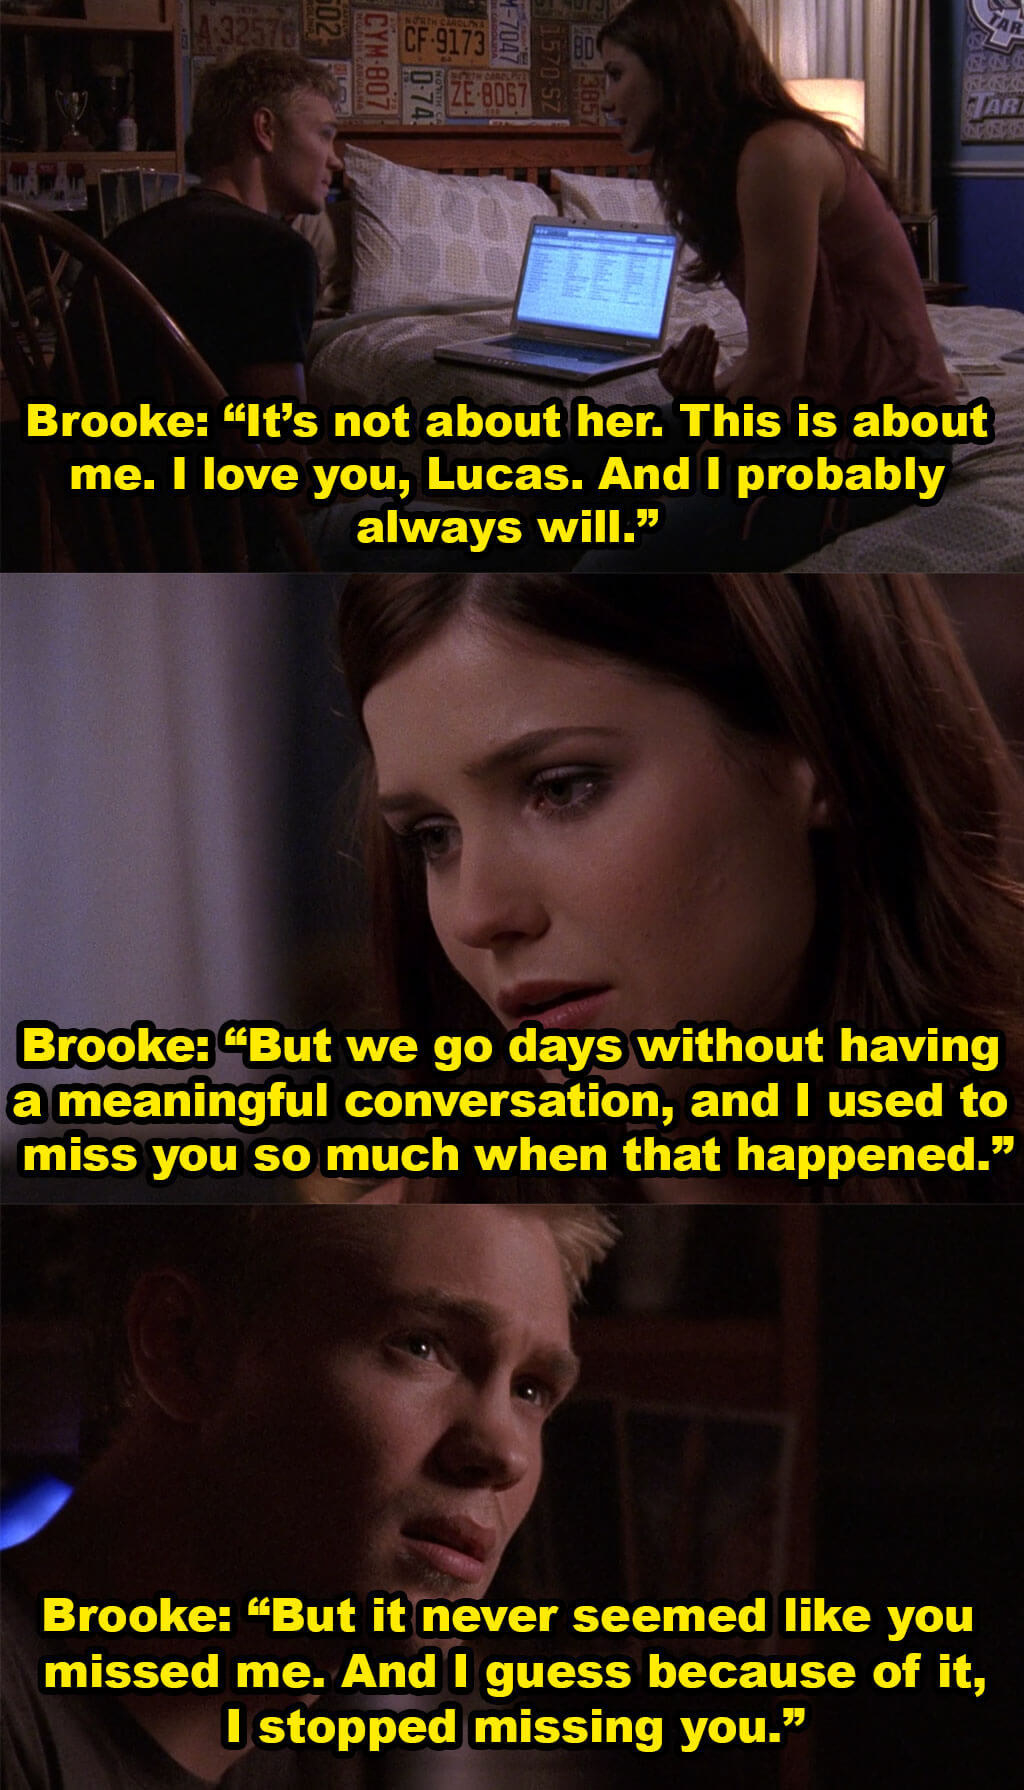 Brooke says it&#x27;s not about Peyton, and she will always love Lucas but they go days without a meaningful conversation and she used to miss him when that happened, but it never seemed like he missed her, so she stopped missing him